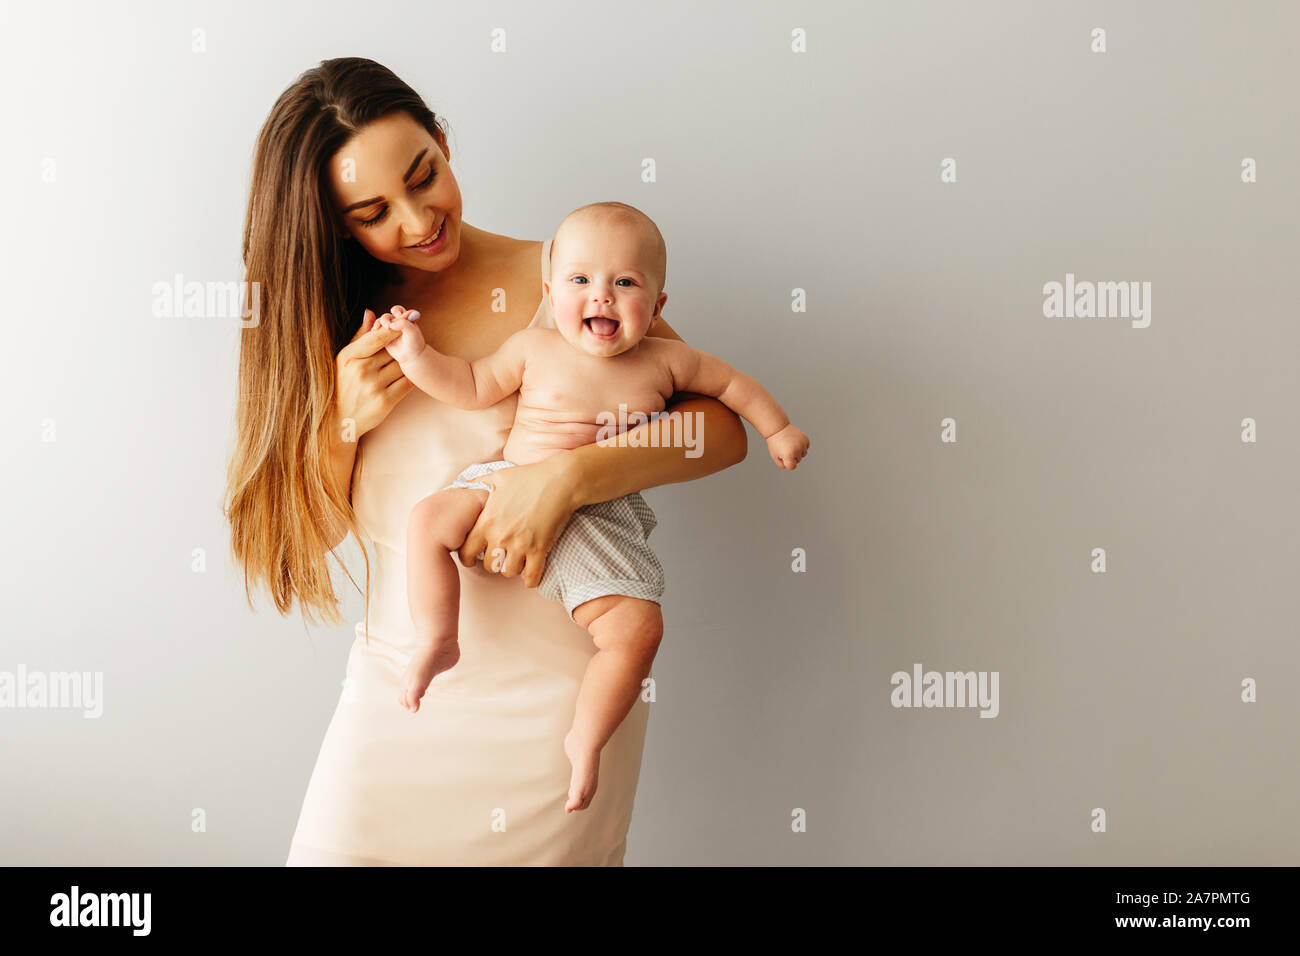 beautiful happy mother holds her baby on a plain light background. Child is smiling Stock Photo